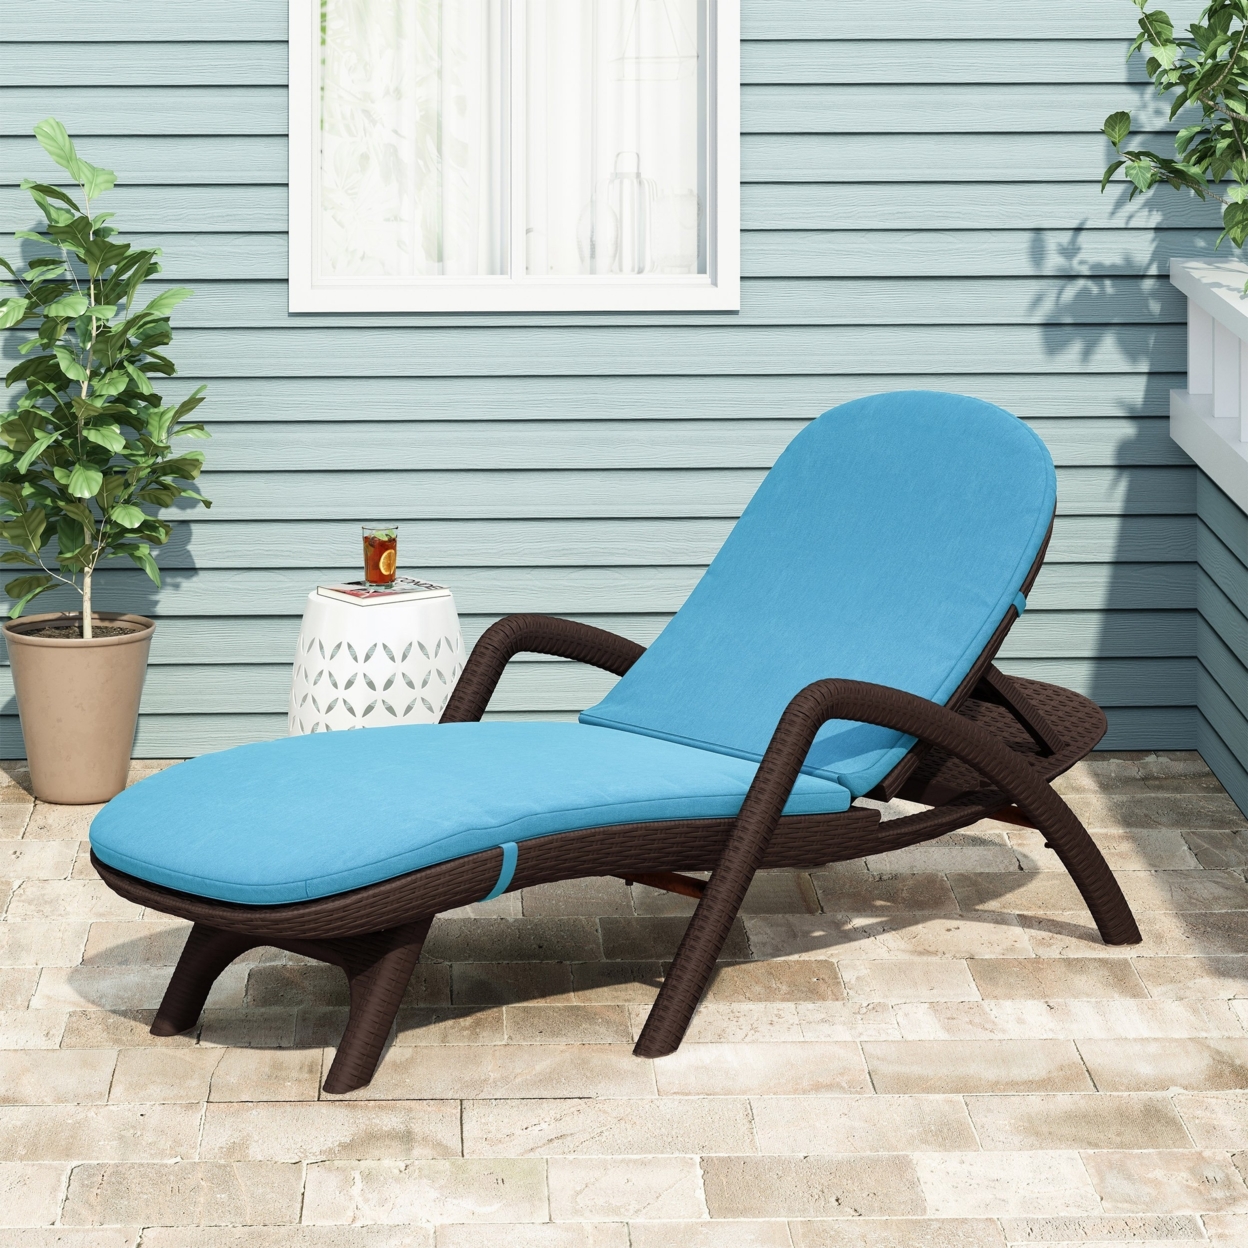 Farirra Outdoor Water Resistant Chaise Lounge Cushion - Blue